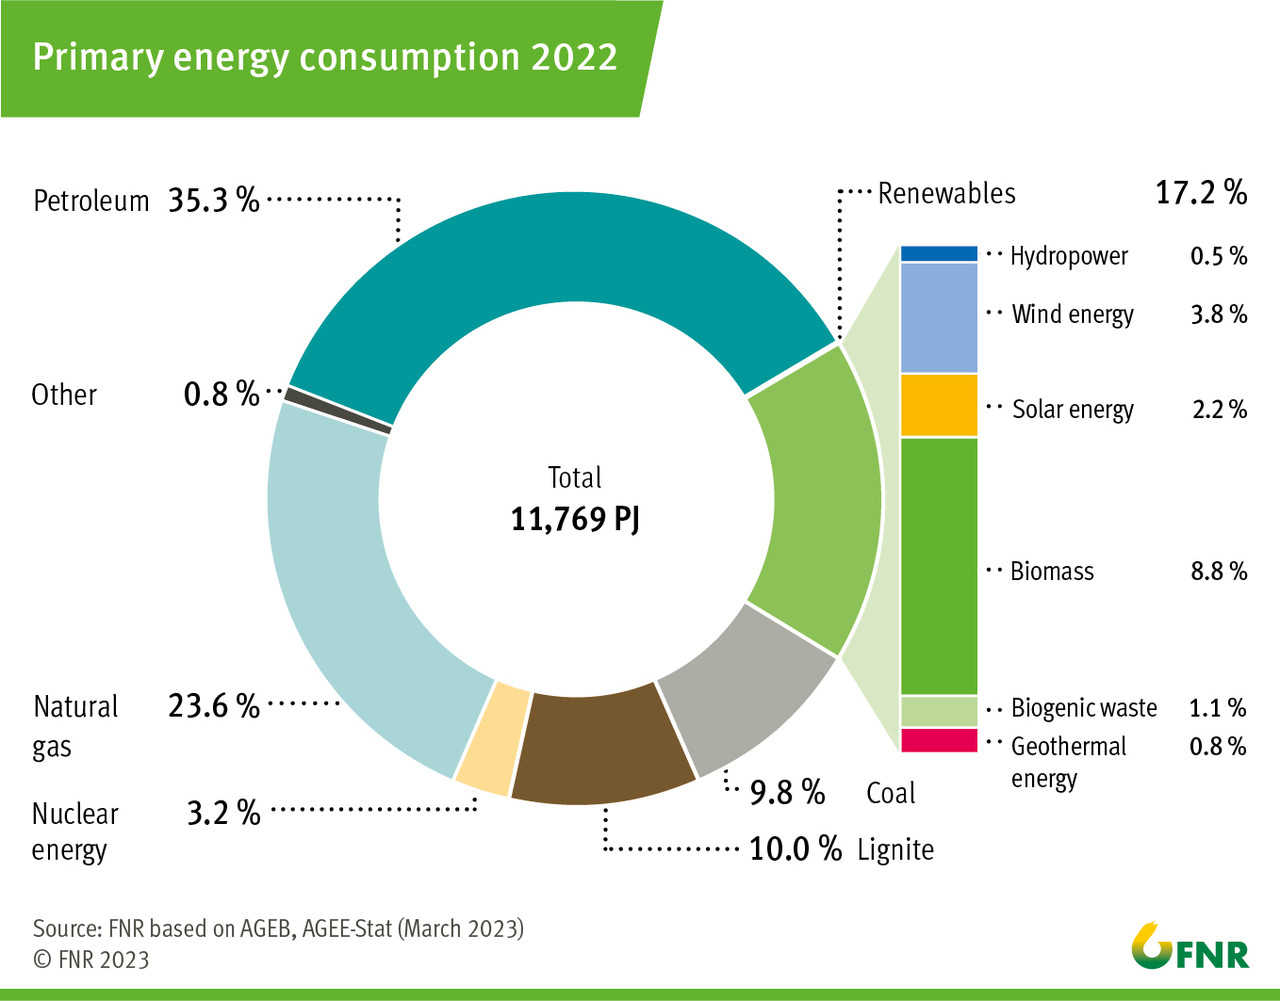 Primary energy consumption in Germany 2022